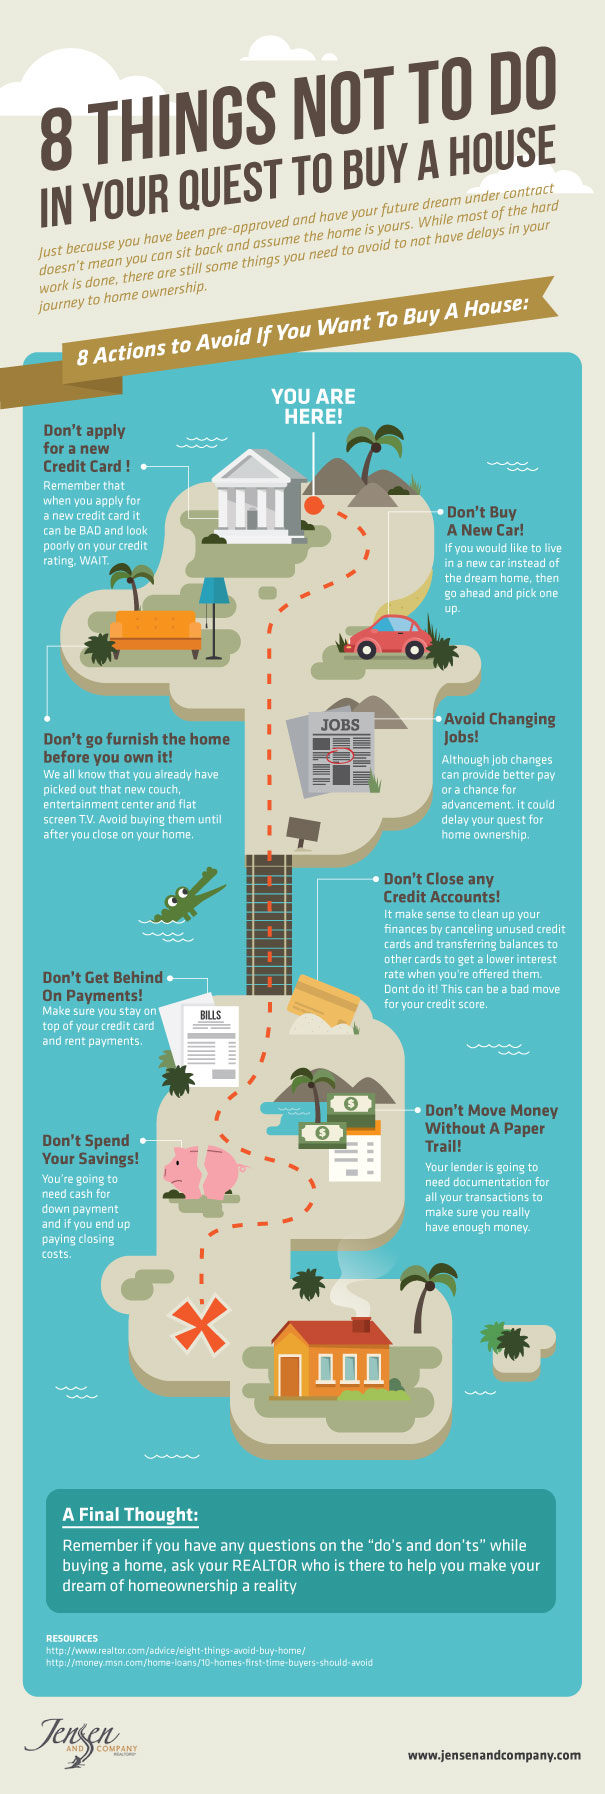 8 things to do before buying a home